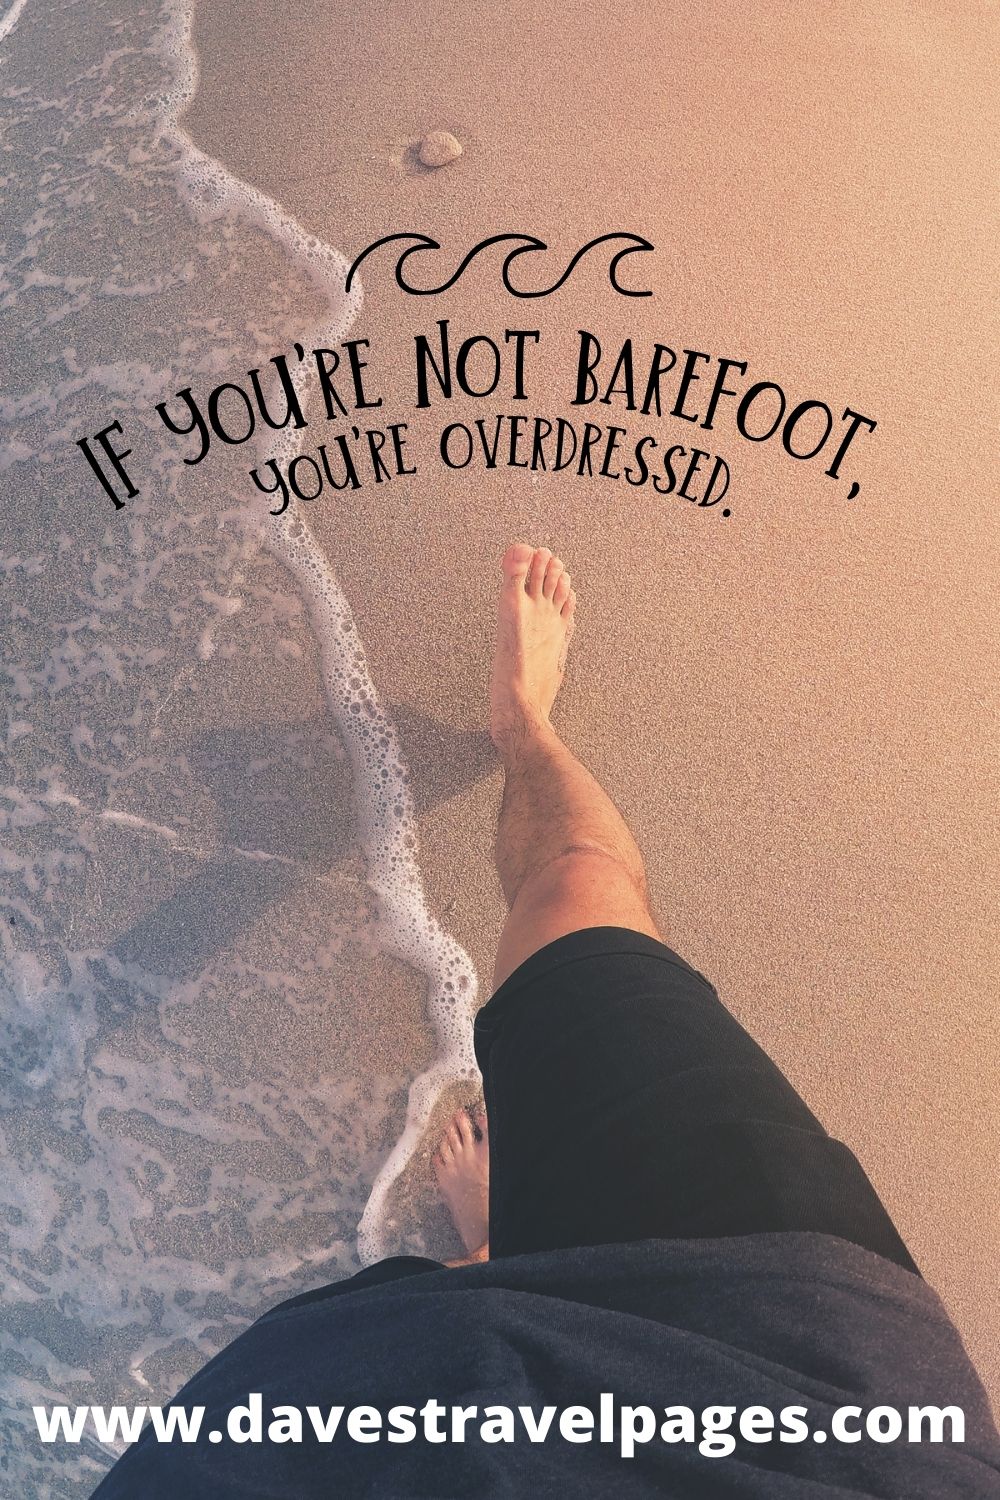 If you're not barefoot caption for Instagram